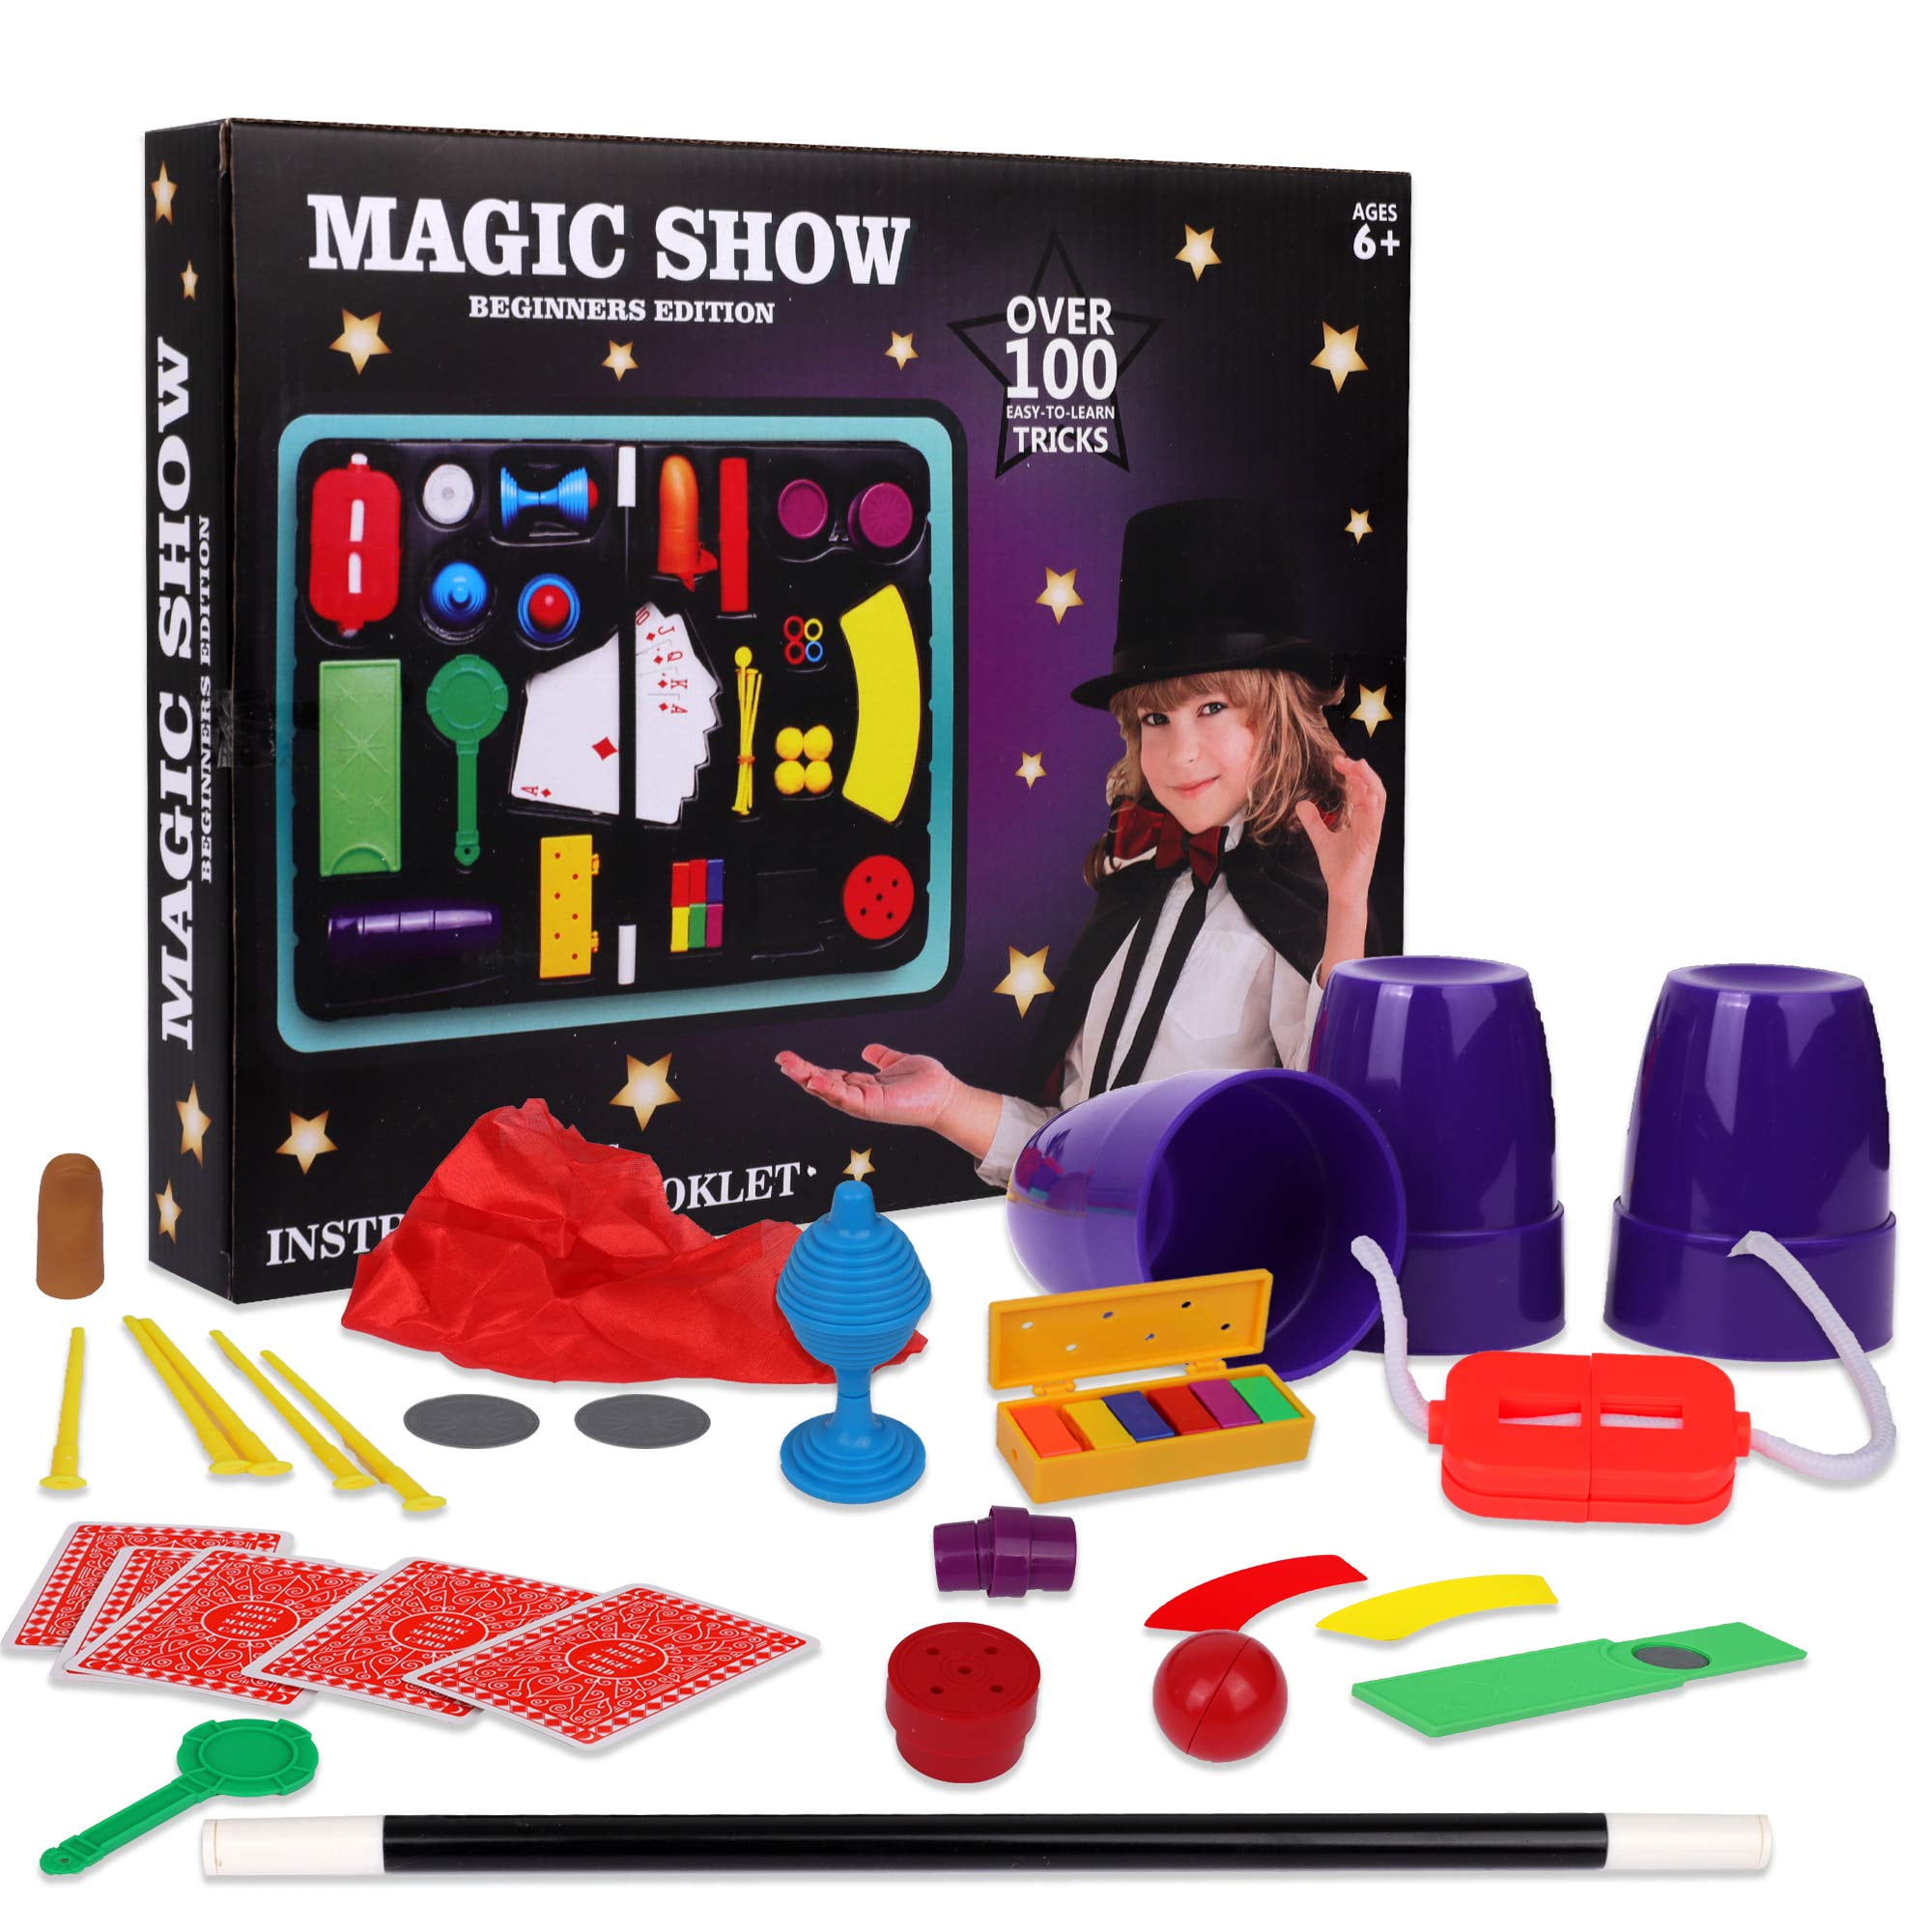  Heyzeibo Magic Kit for Kids - Magic Tricks Games Toy for Girls  & Boys, Magician Pretend Play Dress Up Set with Magic Wand & More Magic  Tricks, Instruction Manual, for Beginners